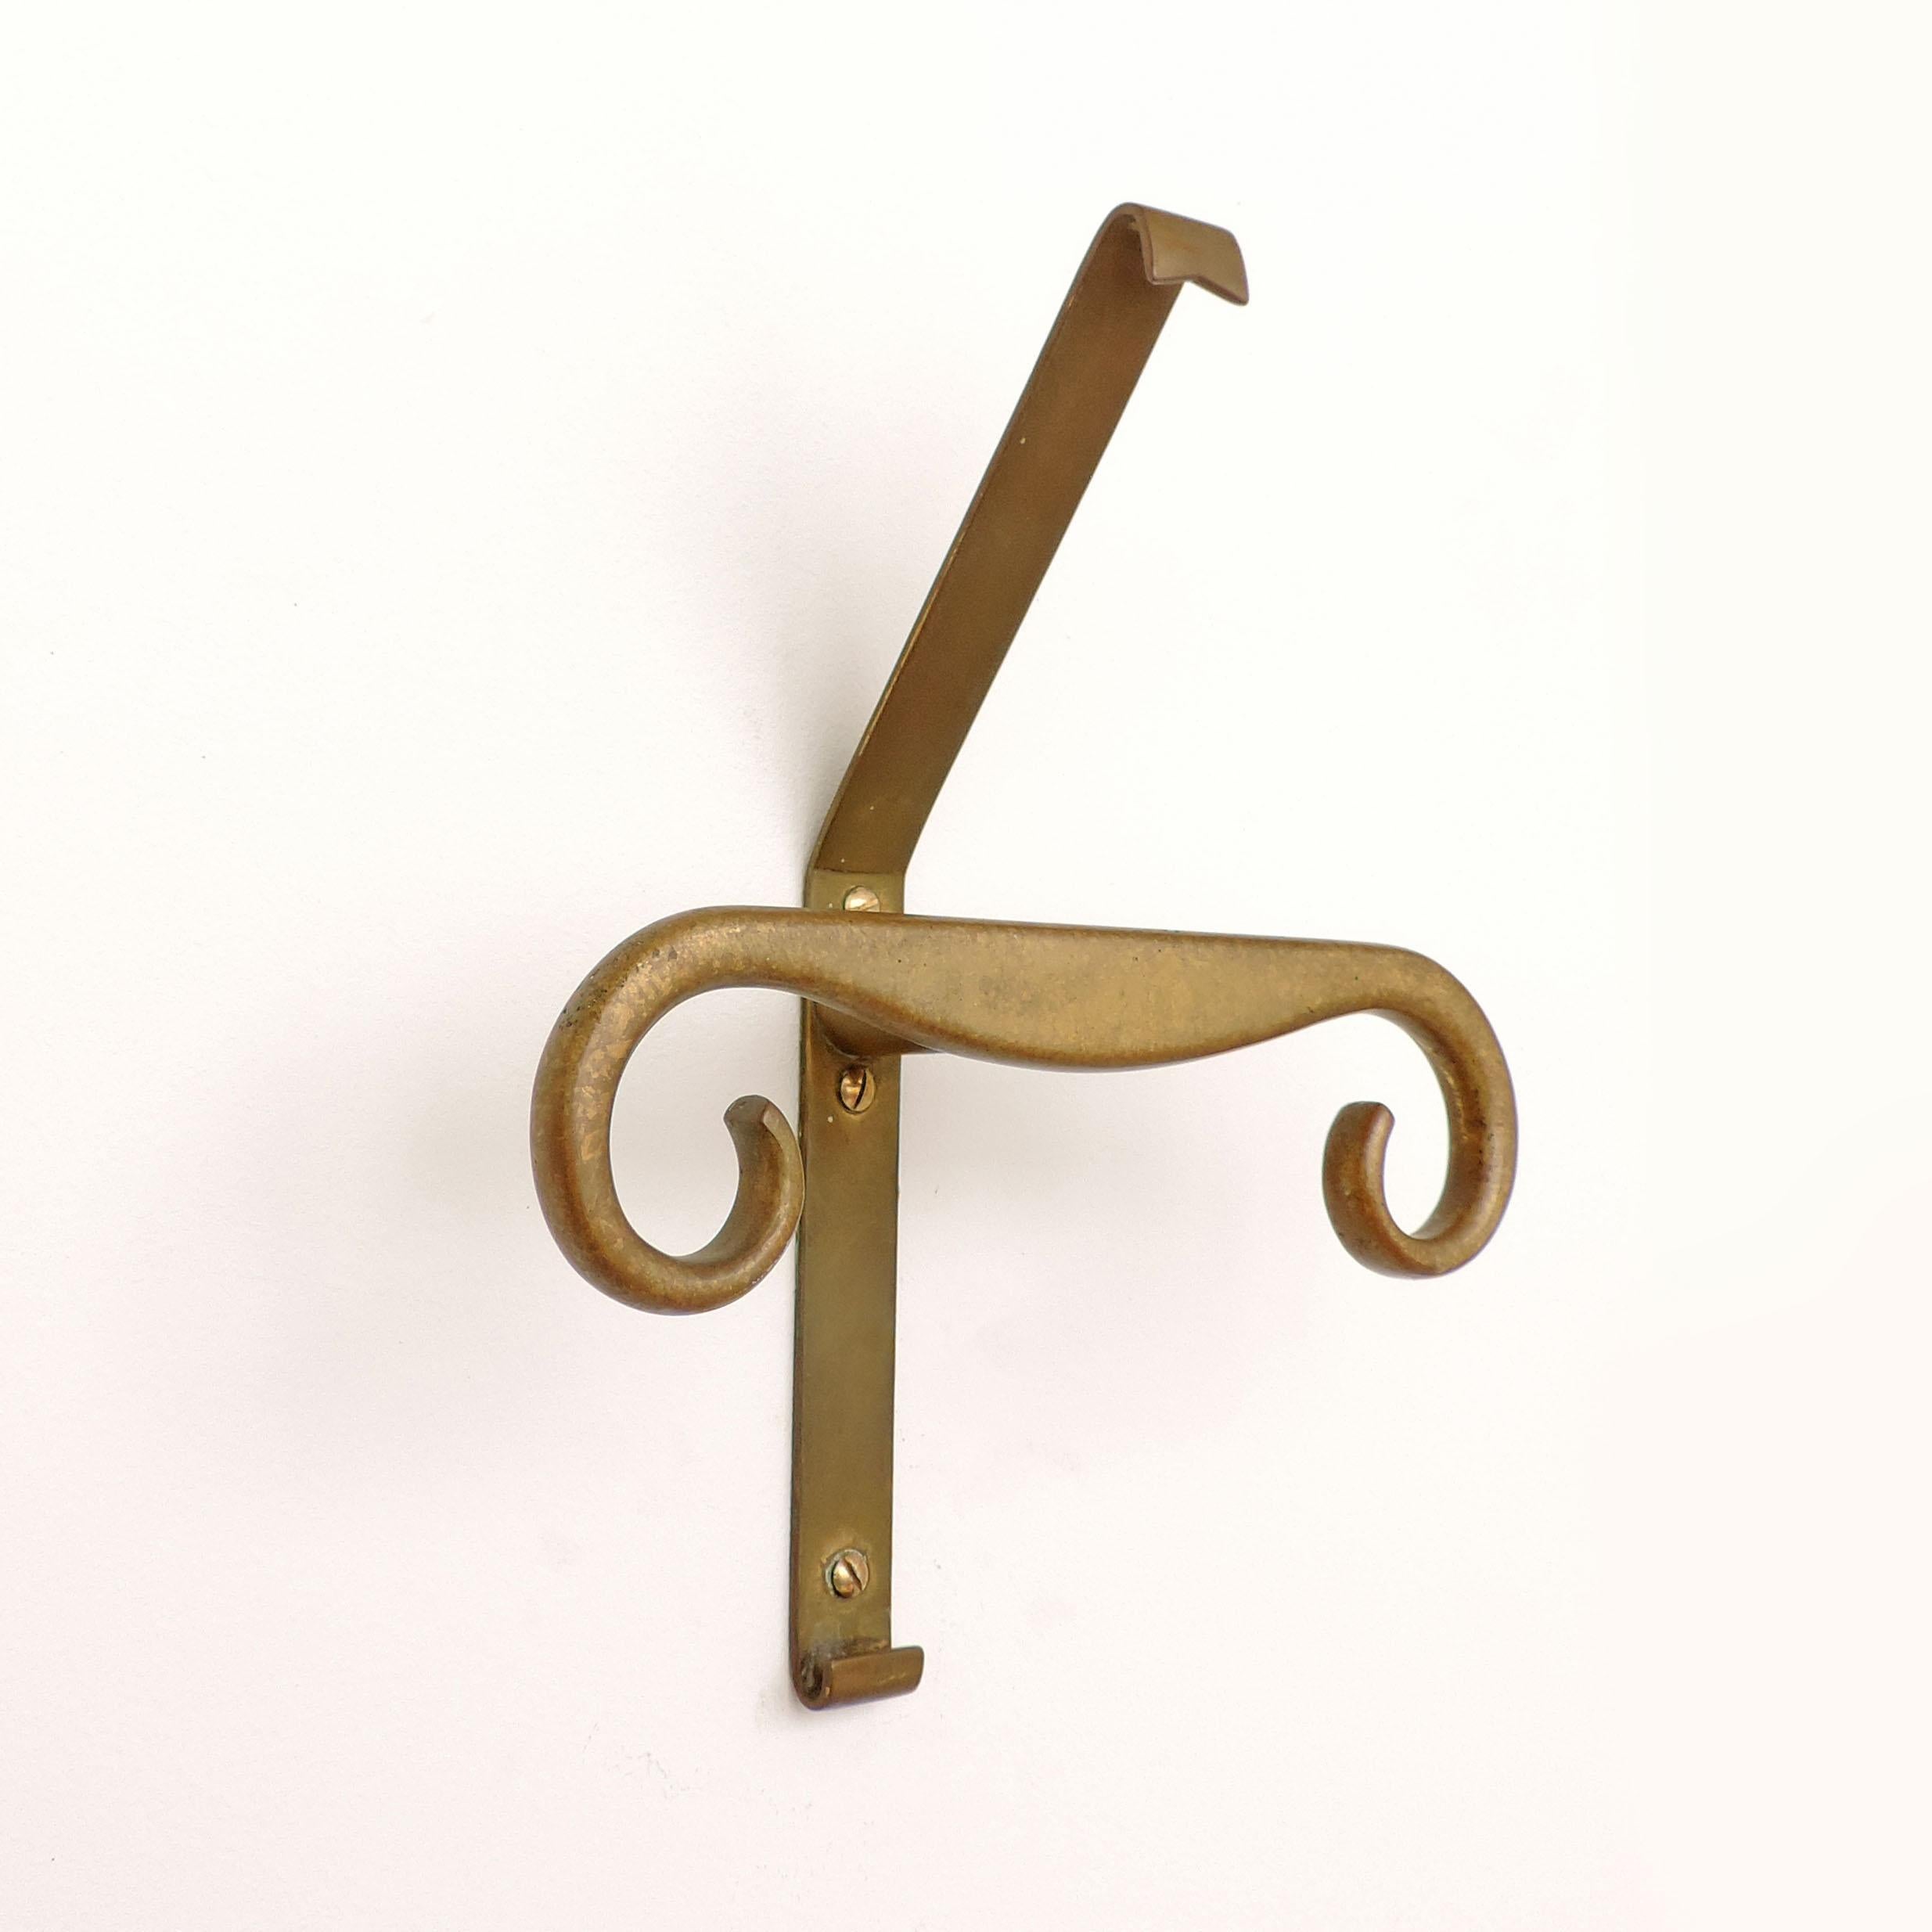 Five Sculptural large Italian brass coat hangers, 1940s
five pieces are available.
  
  